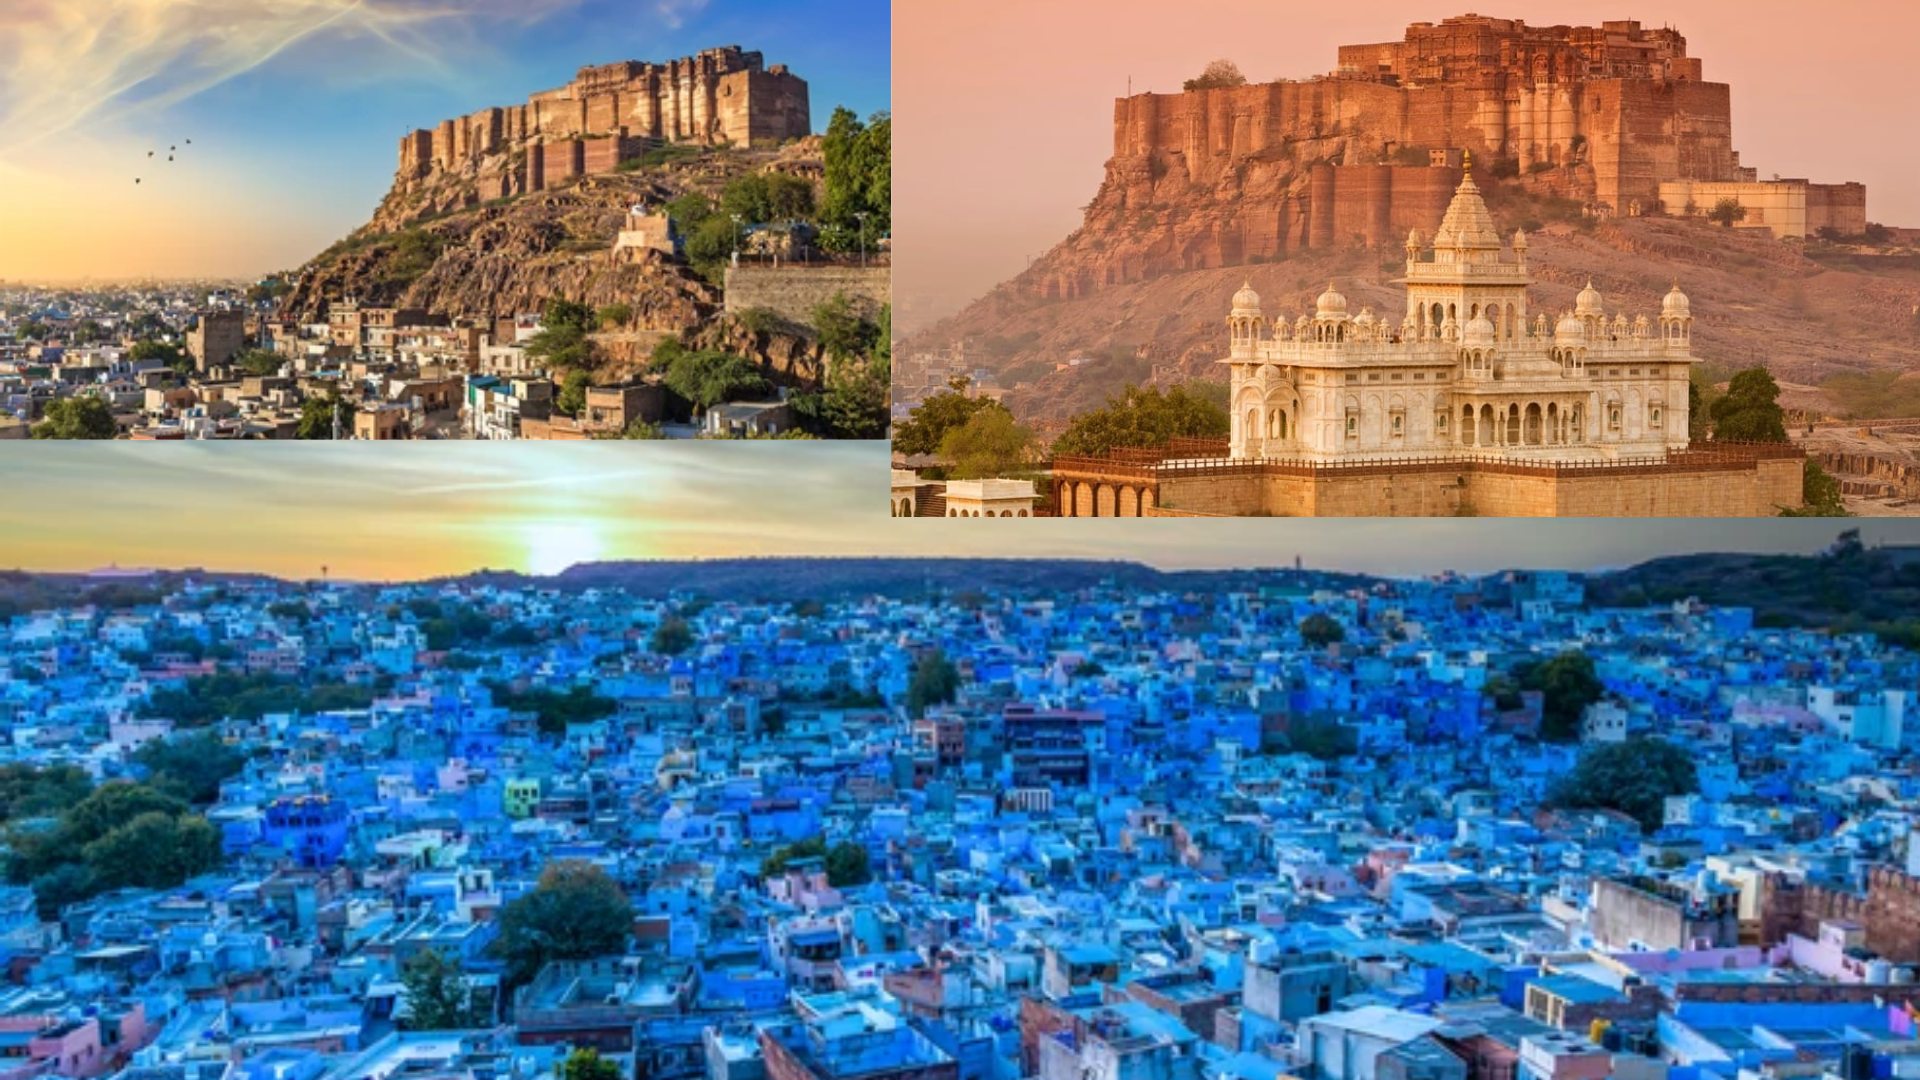 About and History of Jodhpur